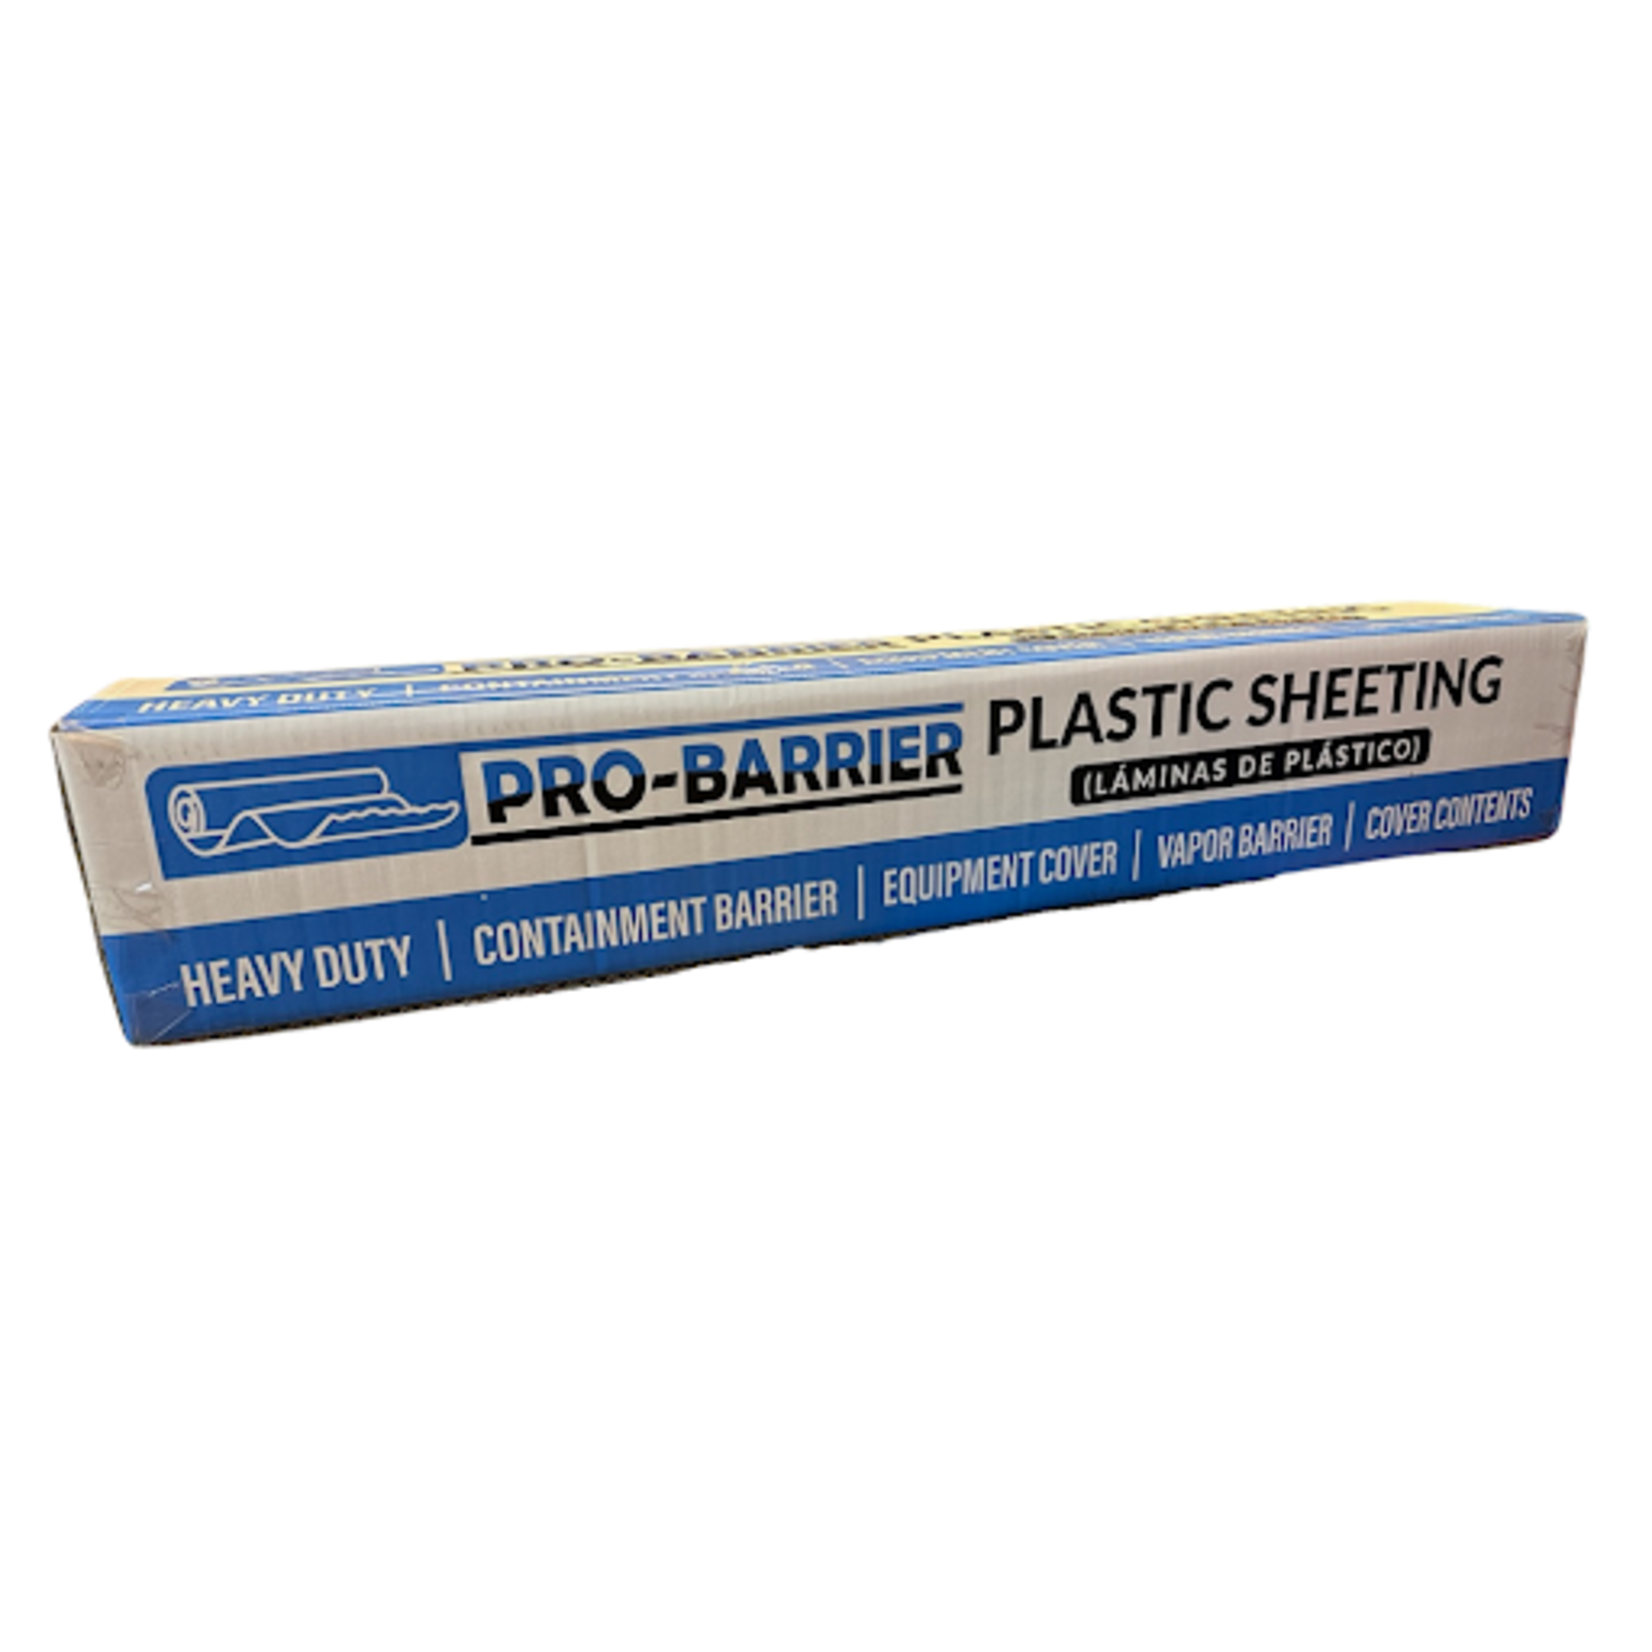 Pro-Barrier Pro-Barrier Plastic Sheeting 4 MIL 12'x100' Clear